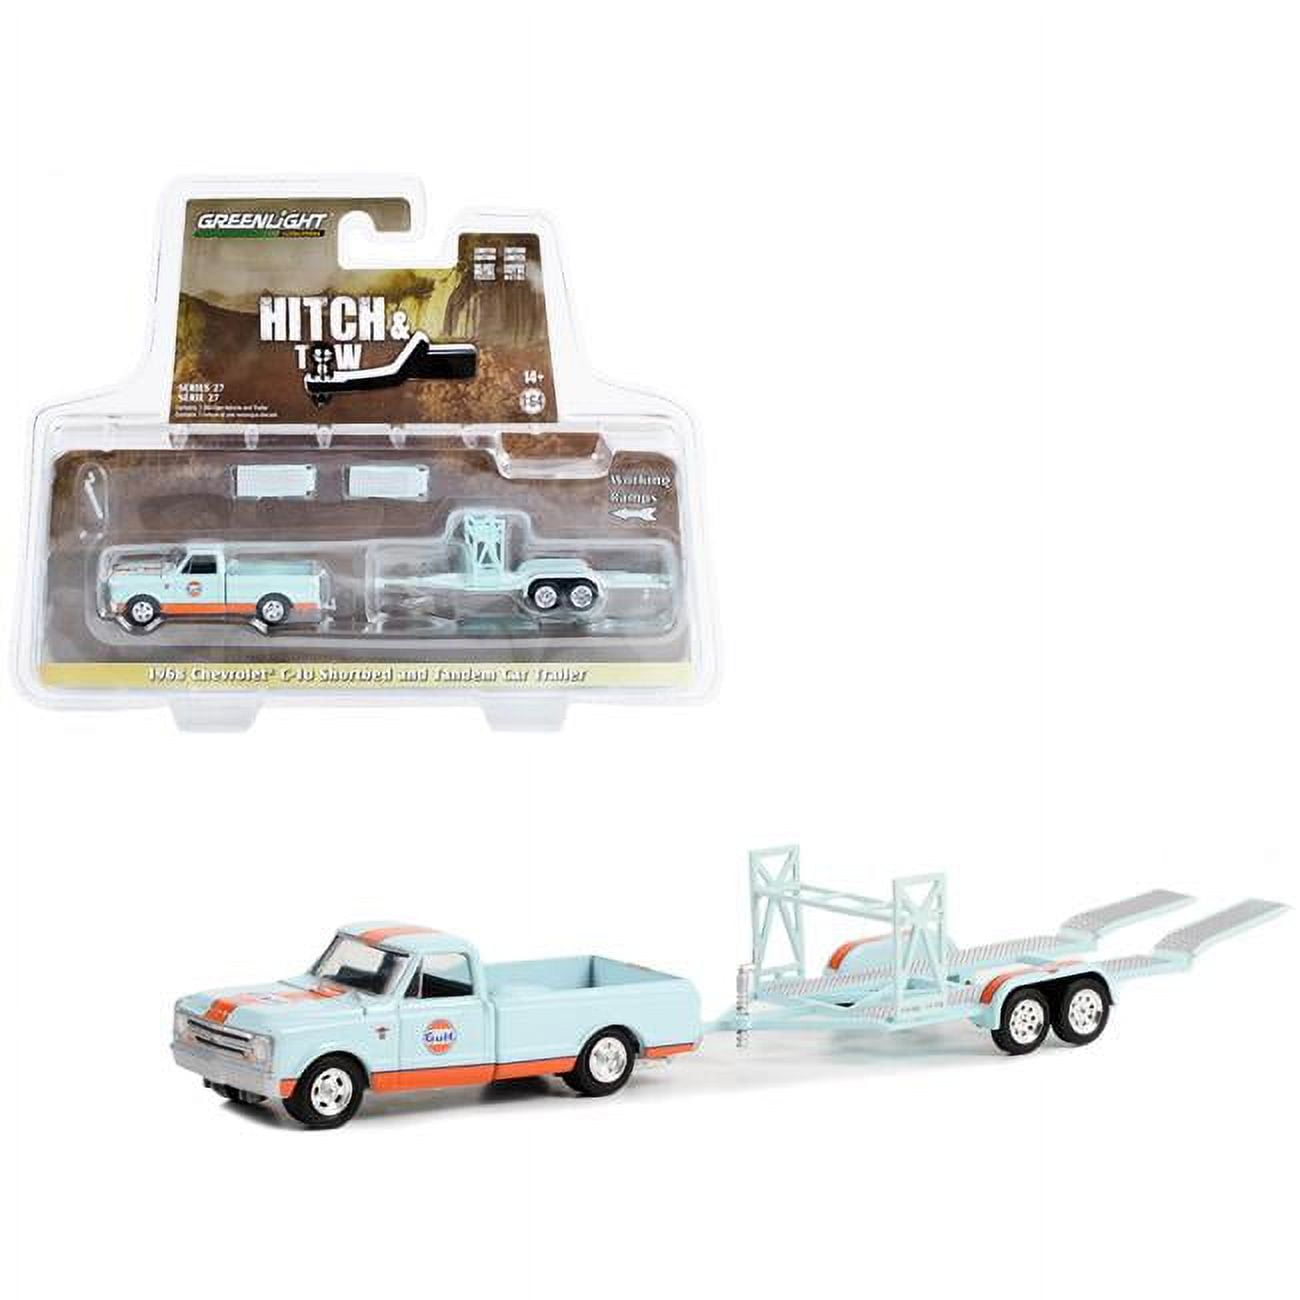 1968 Chevrolet C-10 Shortbed Pickup Truck & Tandem Trailer Gulf Oil HitcHand Tow Series 27 1 by 64 Scale Diecast Model Car, Light Blue & Orange -  GreenLight, 32270A